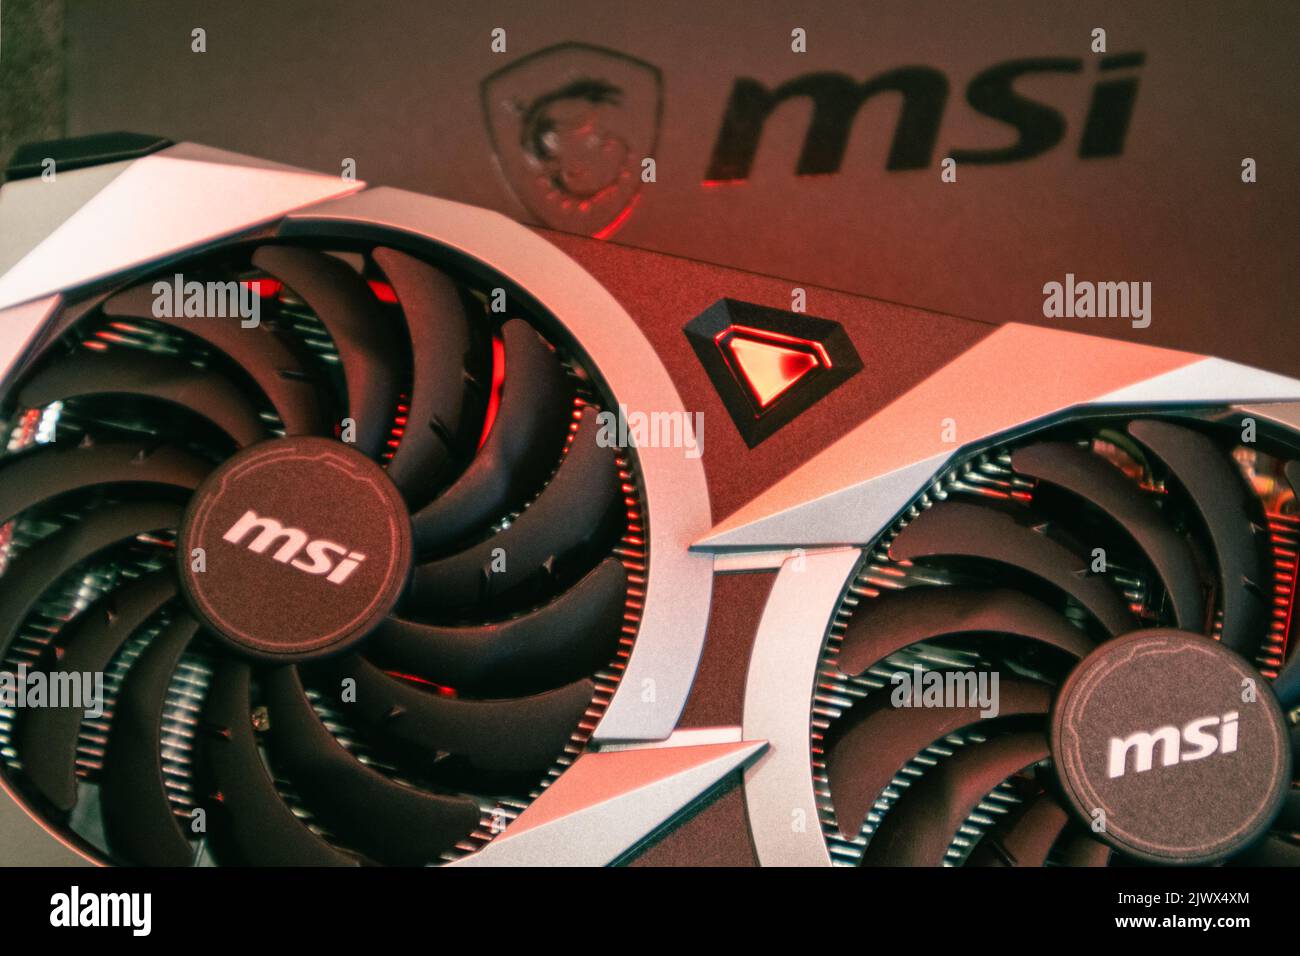 Kyiv, Ukraine - August 19, 2022: MSI MECH 2X graphics card with AMD Radeon RX6700XT chipset in red light, close-up with selective focus Stock Photo